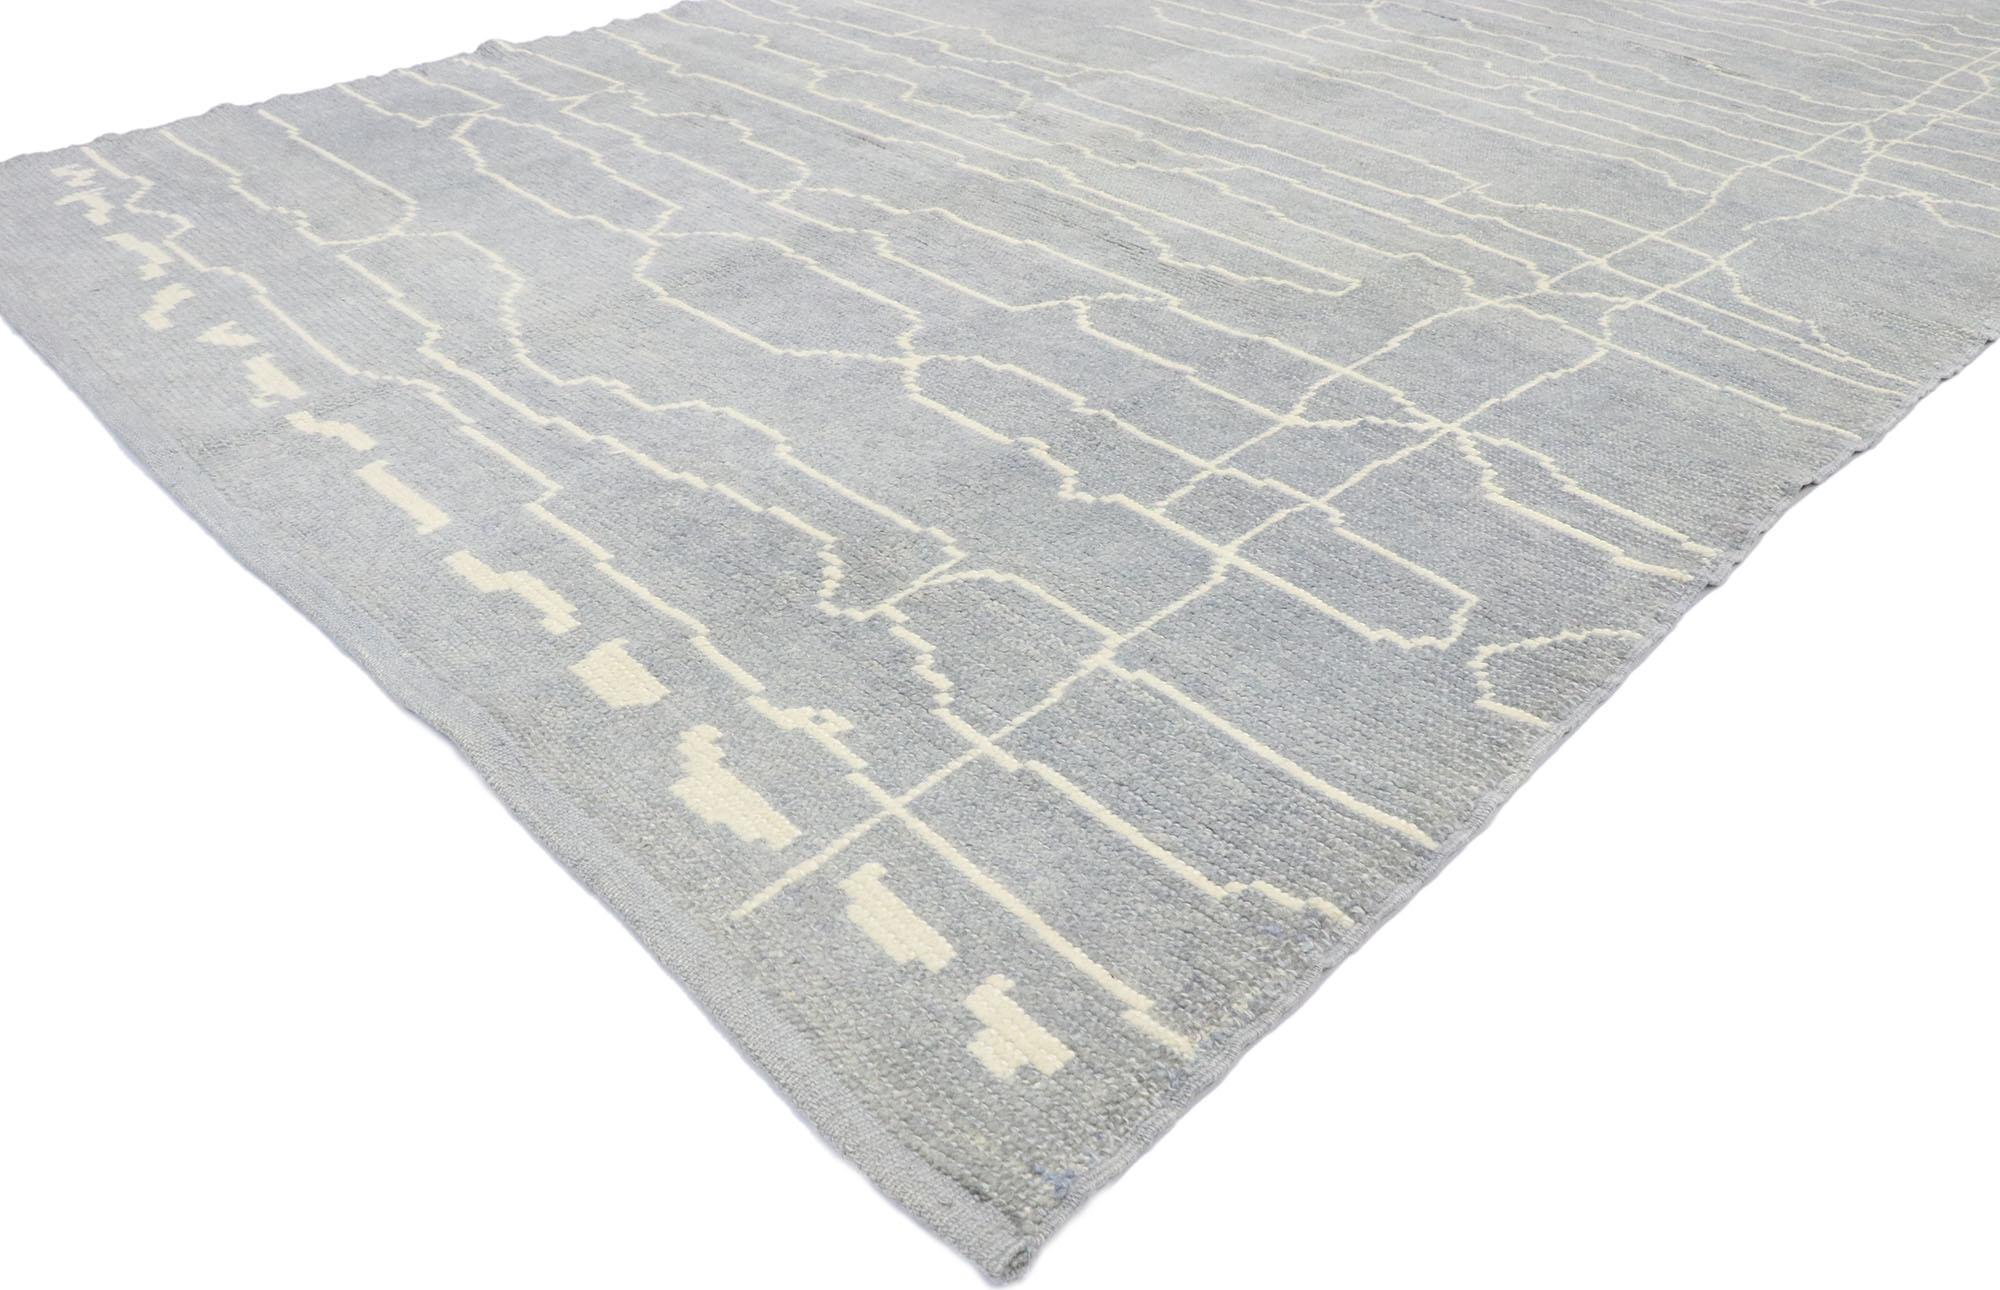 53453, new contemporary gray Moroccan style rug with modern linear design. This hand knotted wool contemporary Moroccan area rug features a combination of horizontal scribbles of line and space in an organic manner spread across the abrashed gray